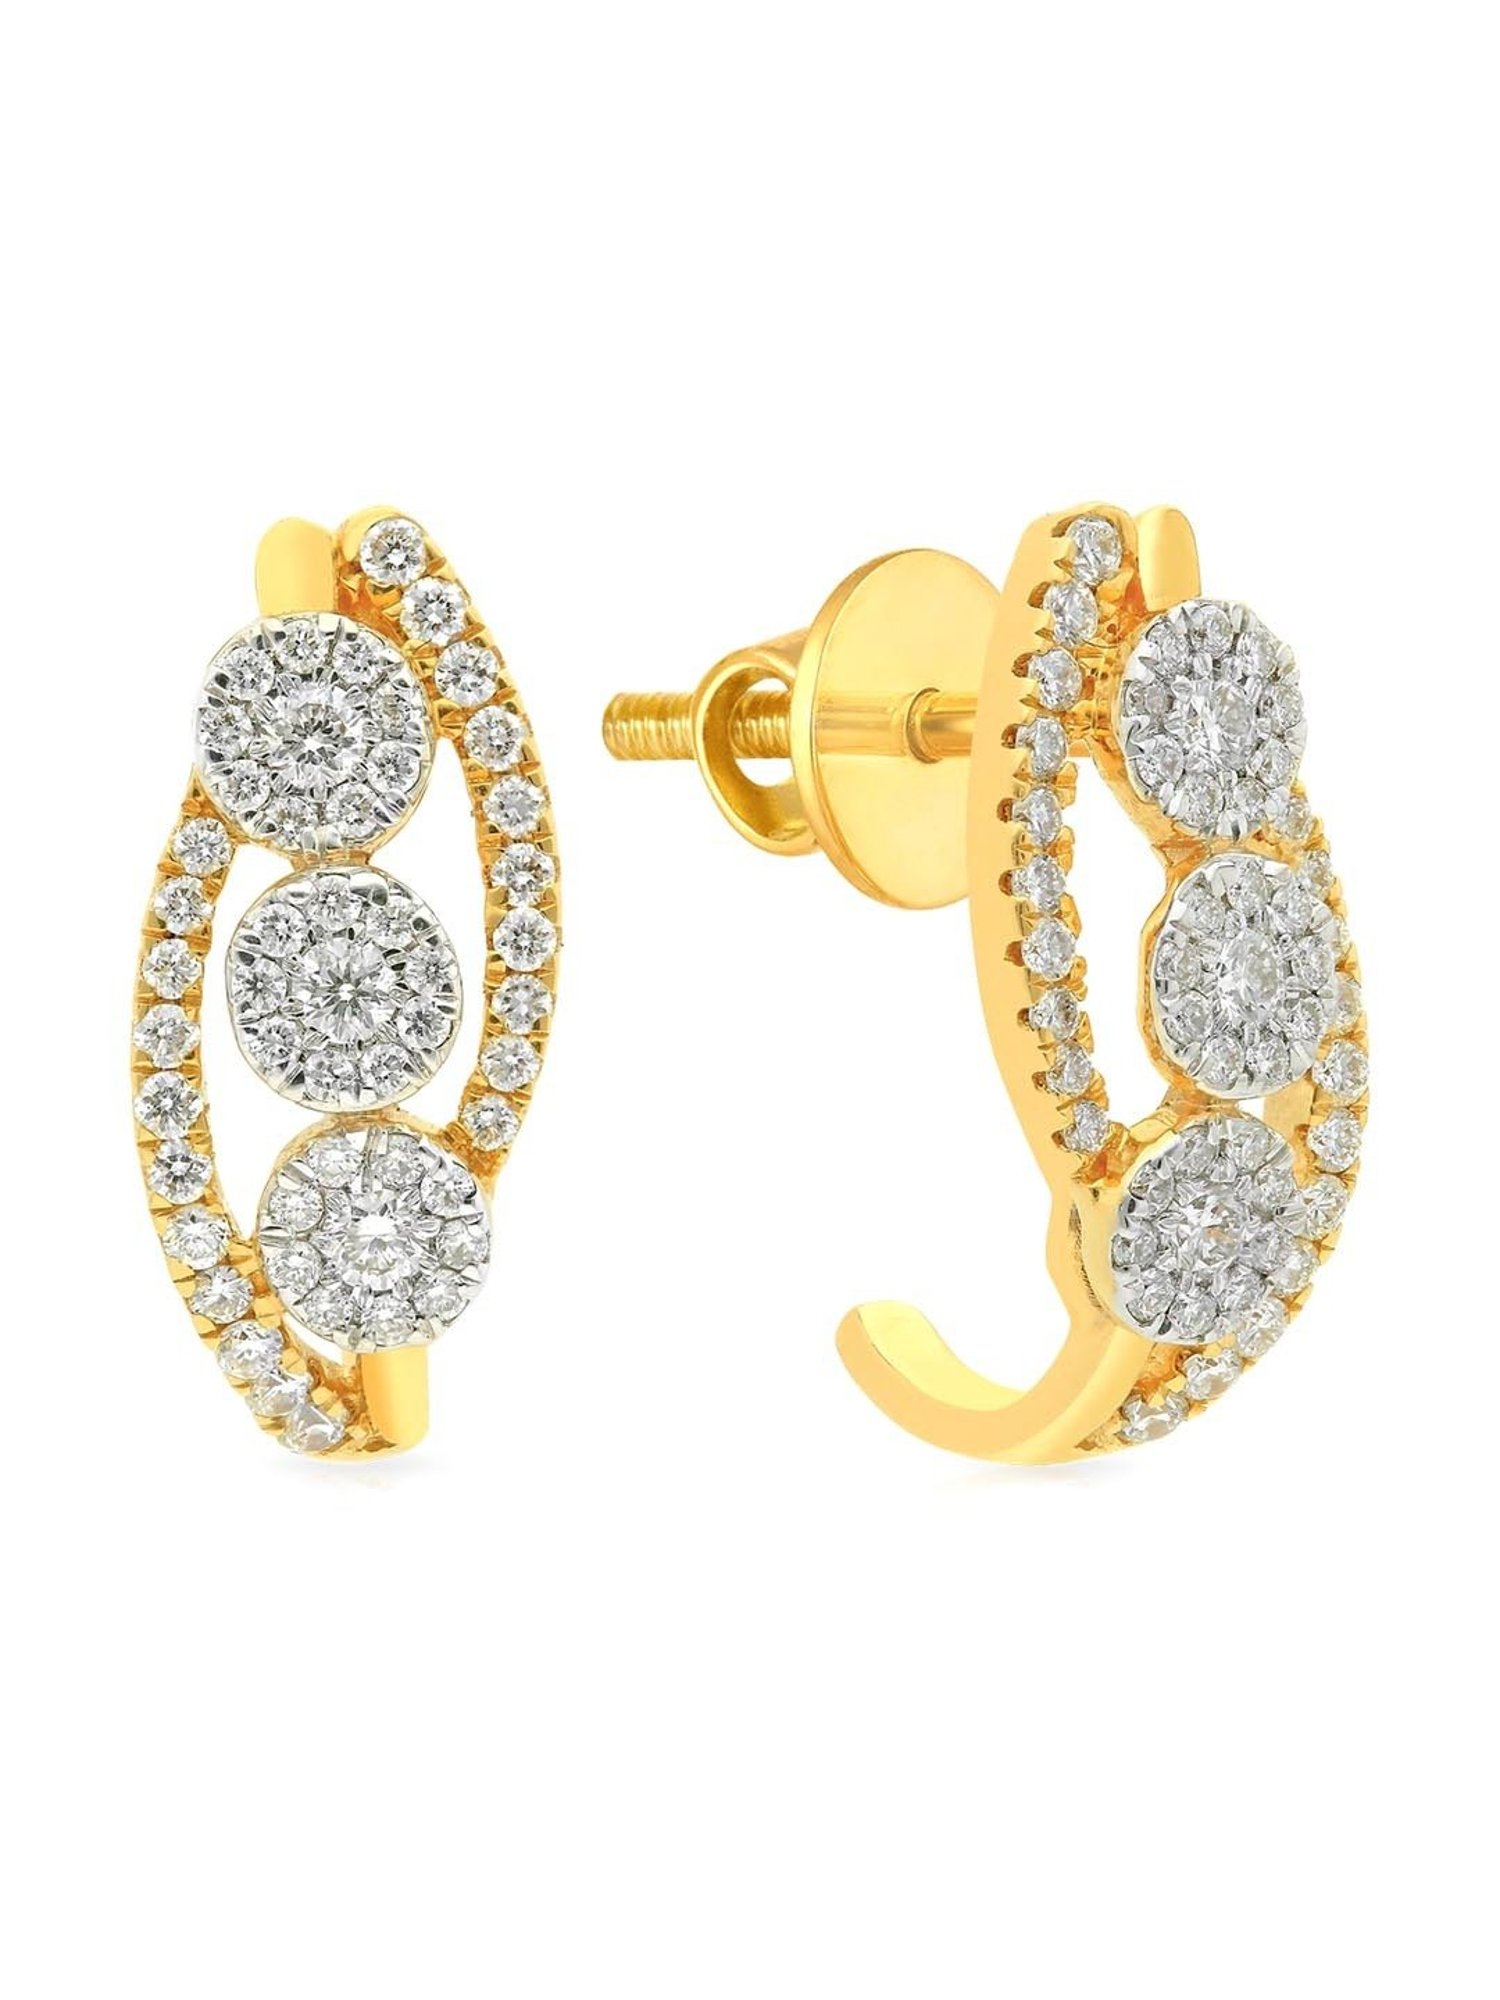 Malabar Gold and Diamonds 18KT Two Colour Gold and Diamond Jhumki Earrings  for Women : Amazon.in: Fashion